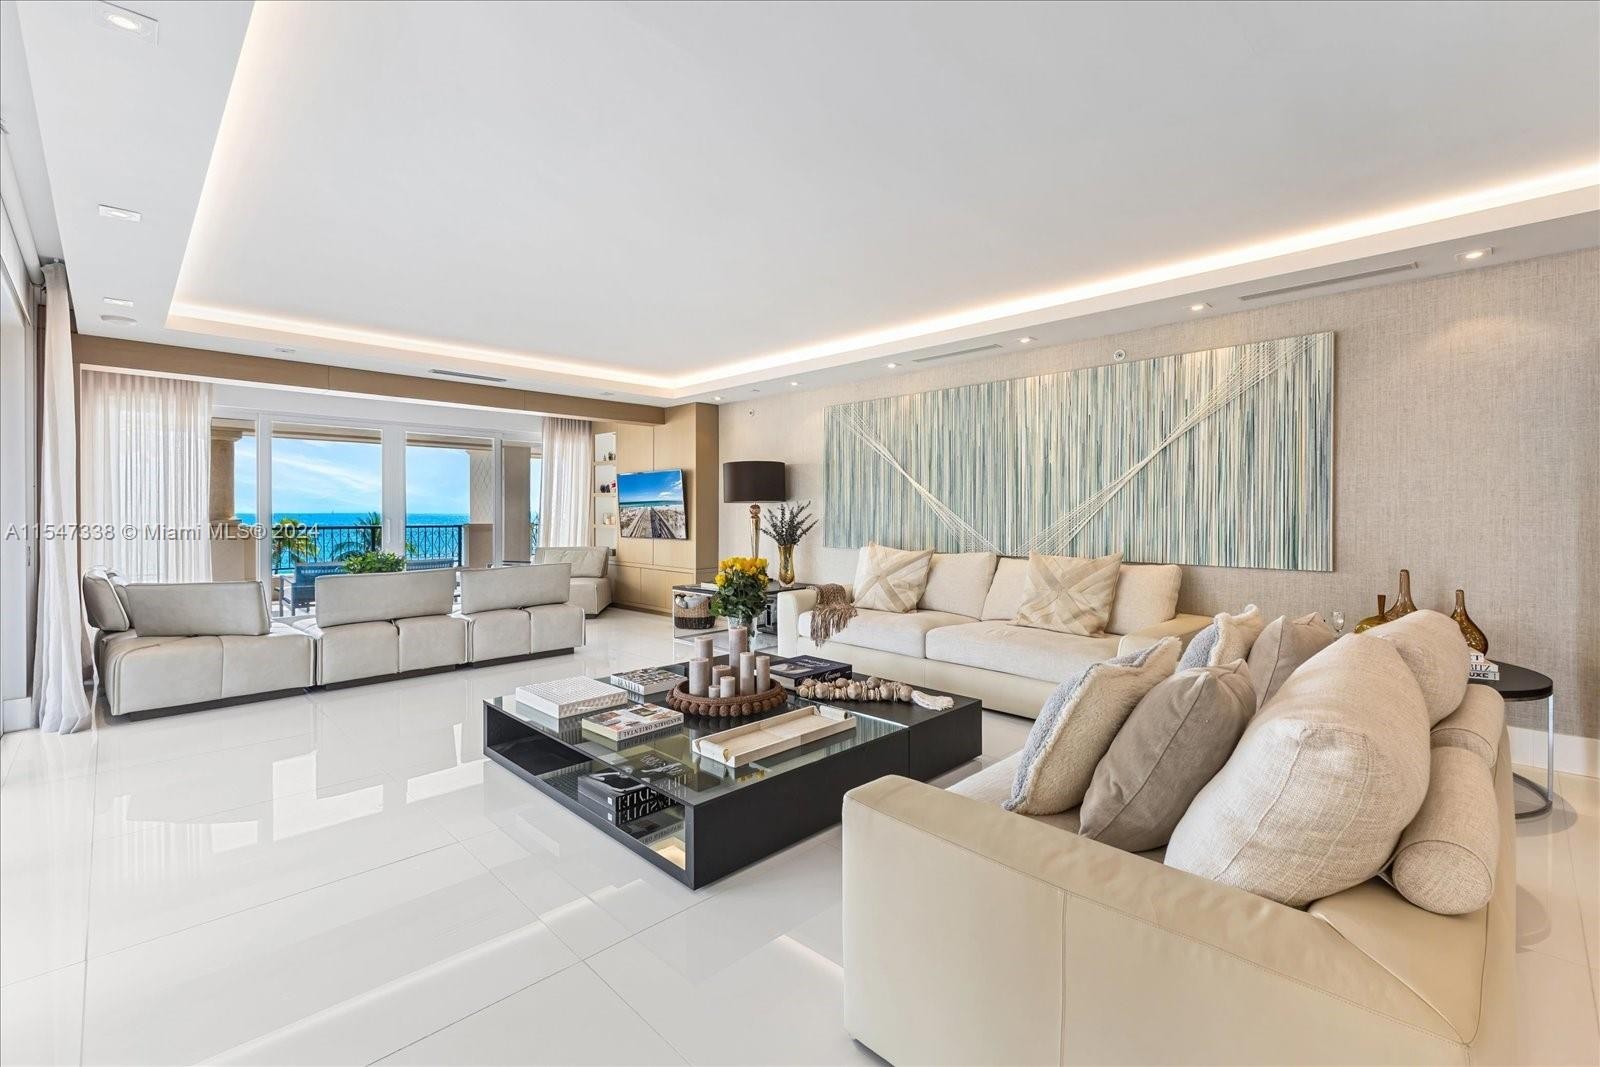 3. 7431 Fisher Island Dr